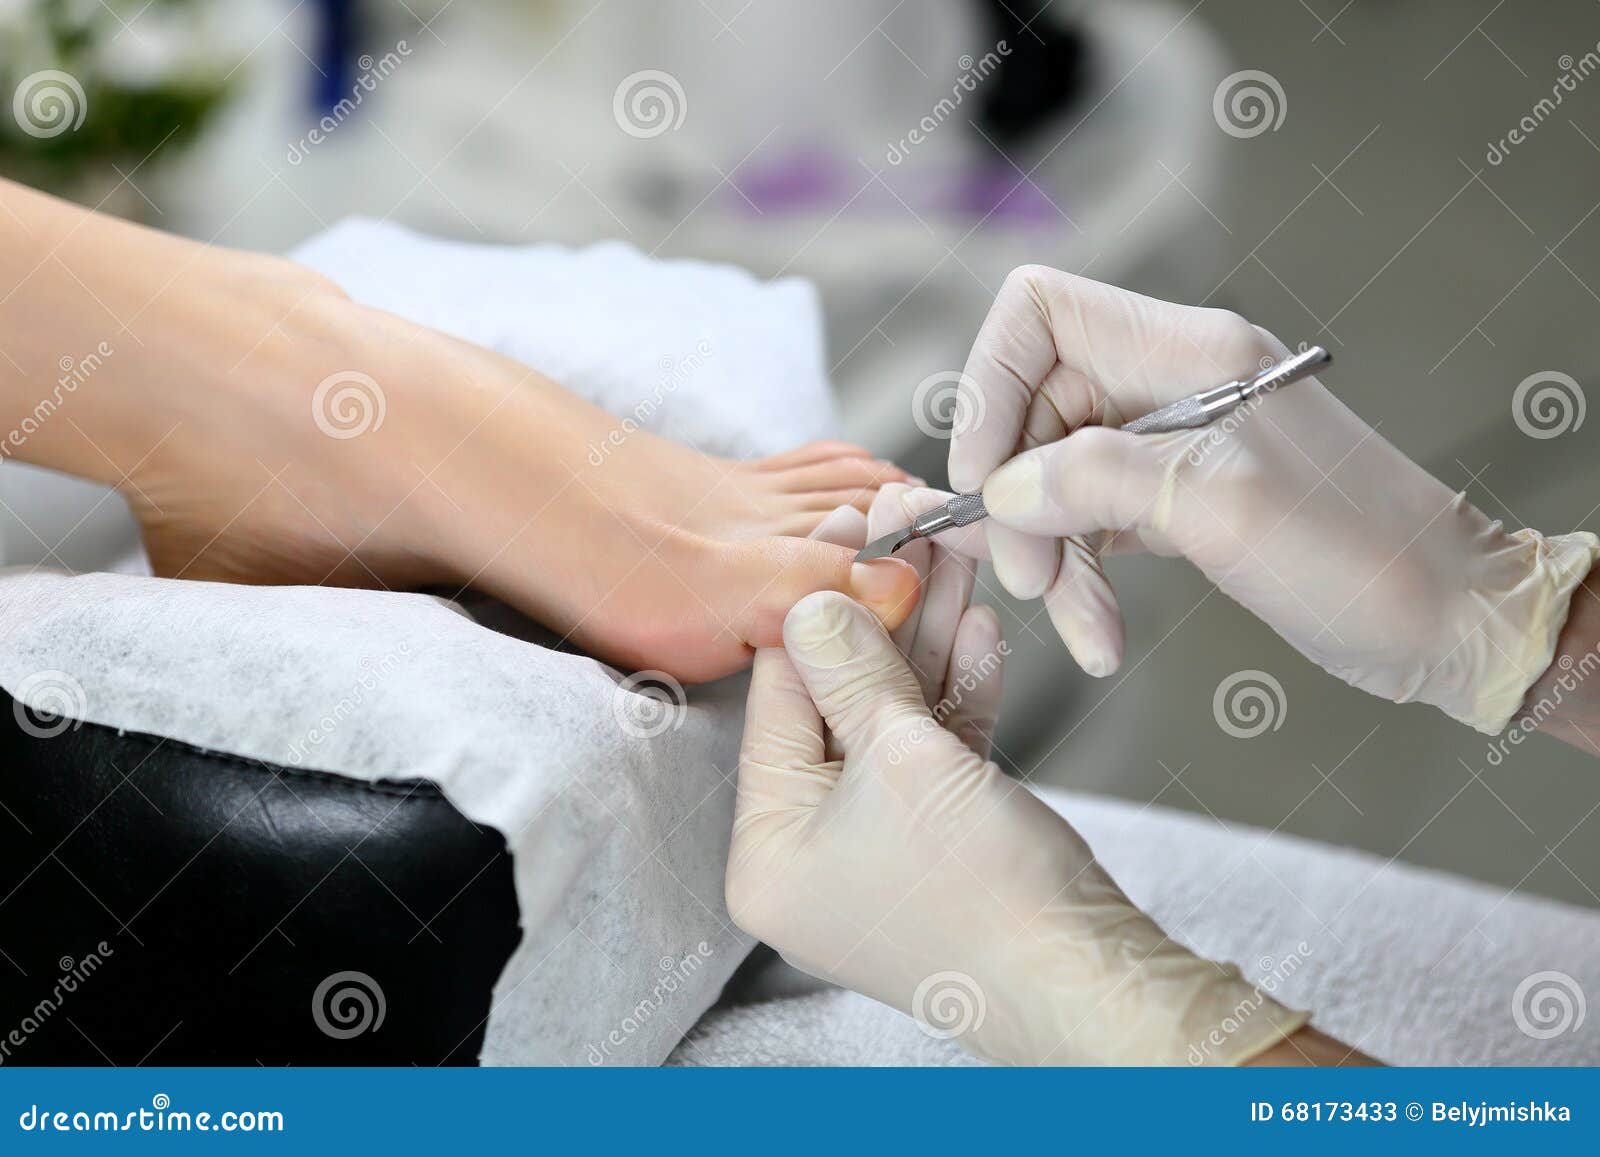 chiropody master provides high quality services